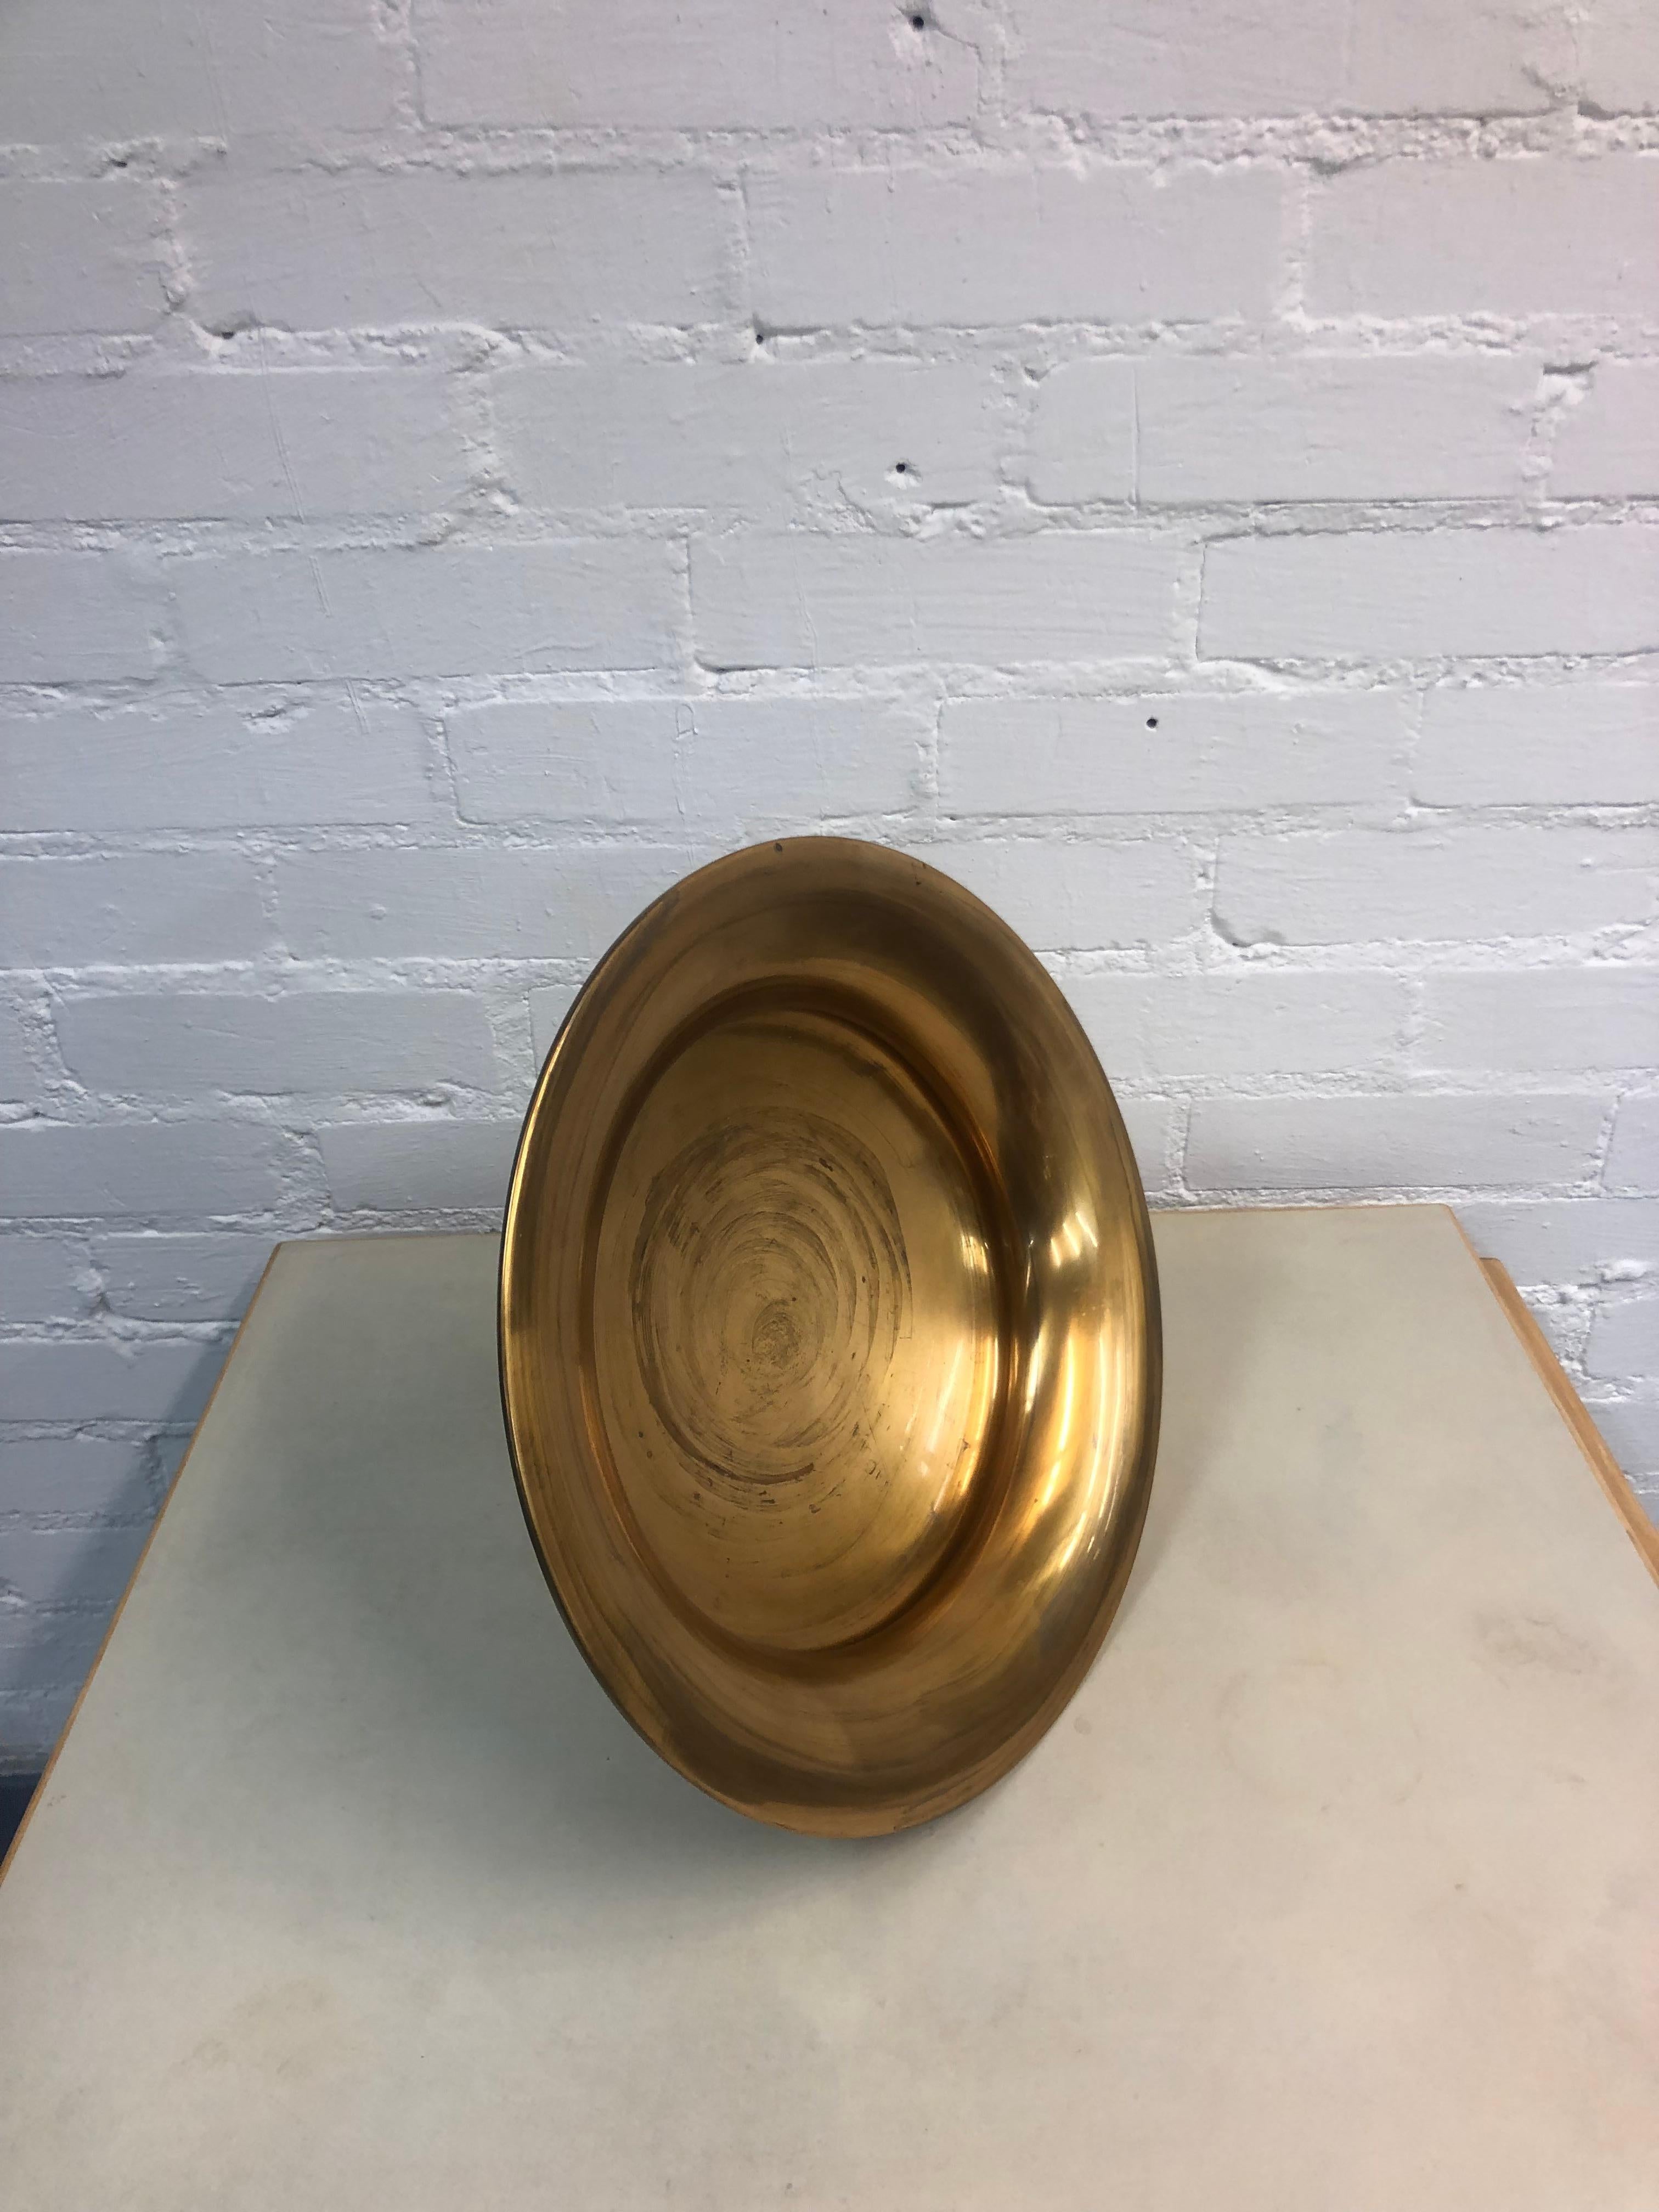 A special piece designed by the genious Tapio Wirkkala, only made upon requisition. This model 480 bowl is in full bronze, and is large enough to stand out on its own and make a statement. The elegance ascends from the simplicity of the design, and